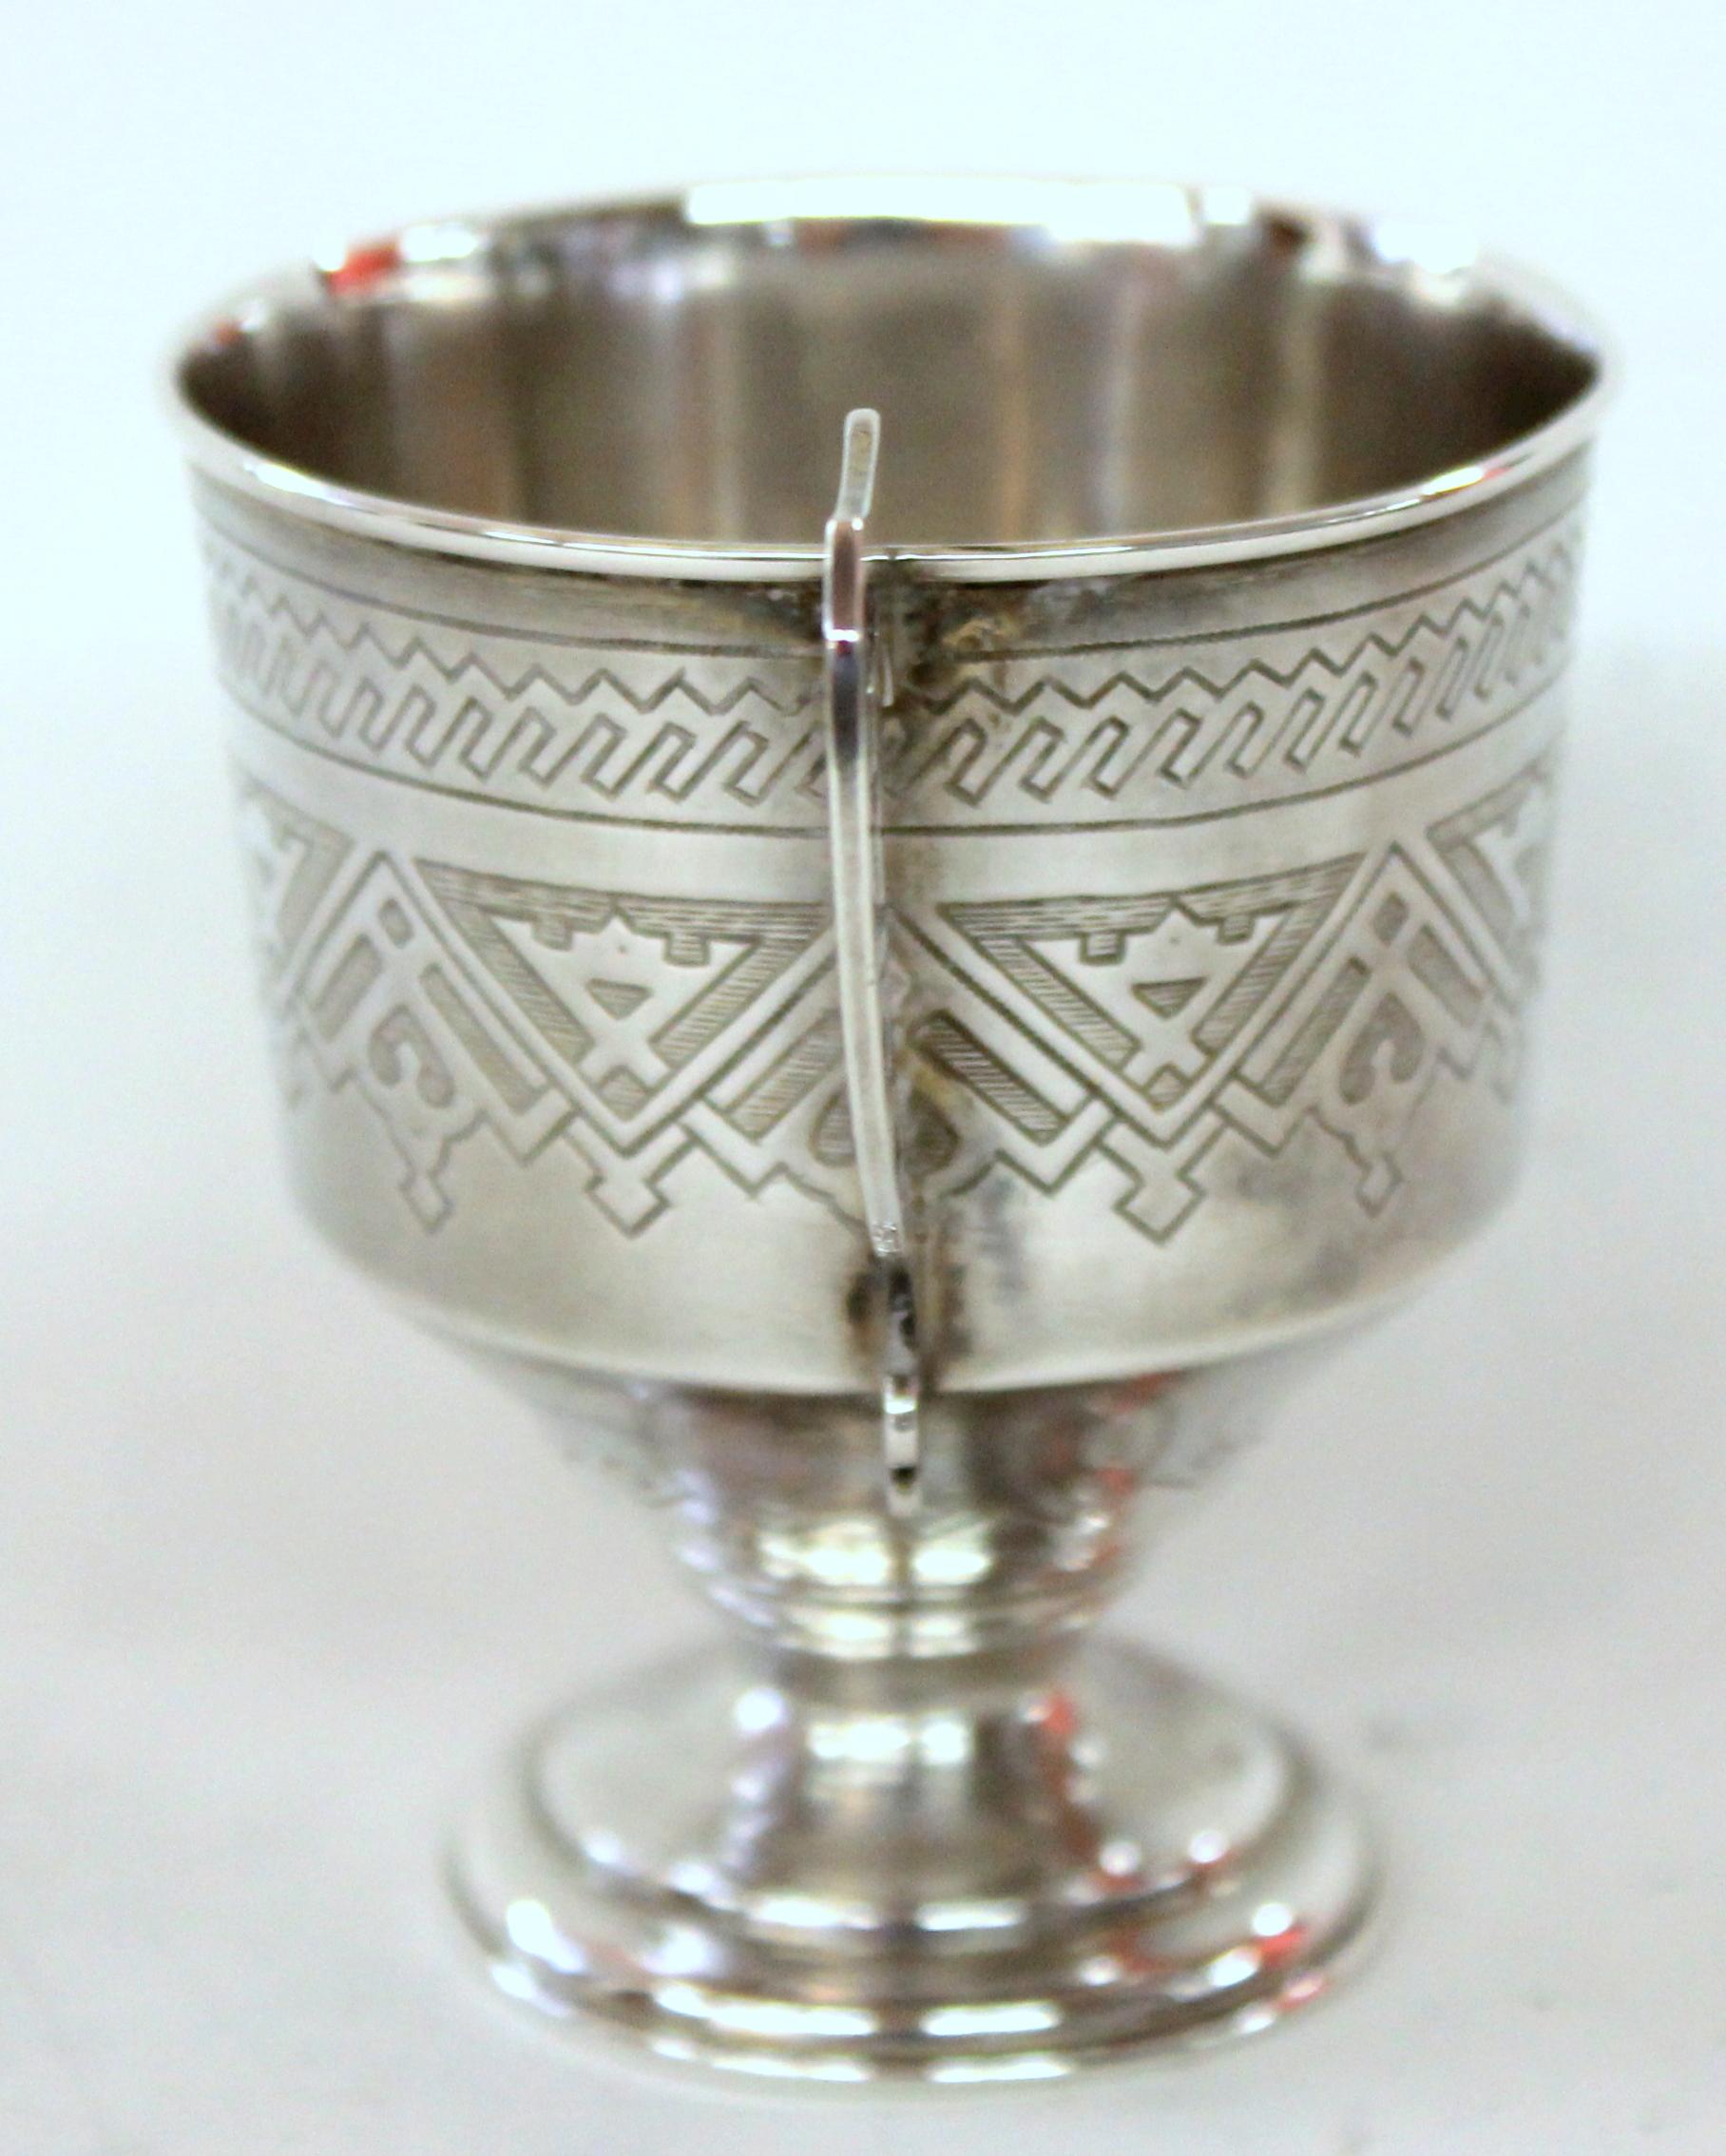 Antique Imperial Russian Silver Hand Engraved Cup and Saucer, Aleksandr Fuld For Sale 1